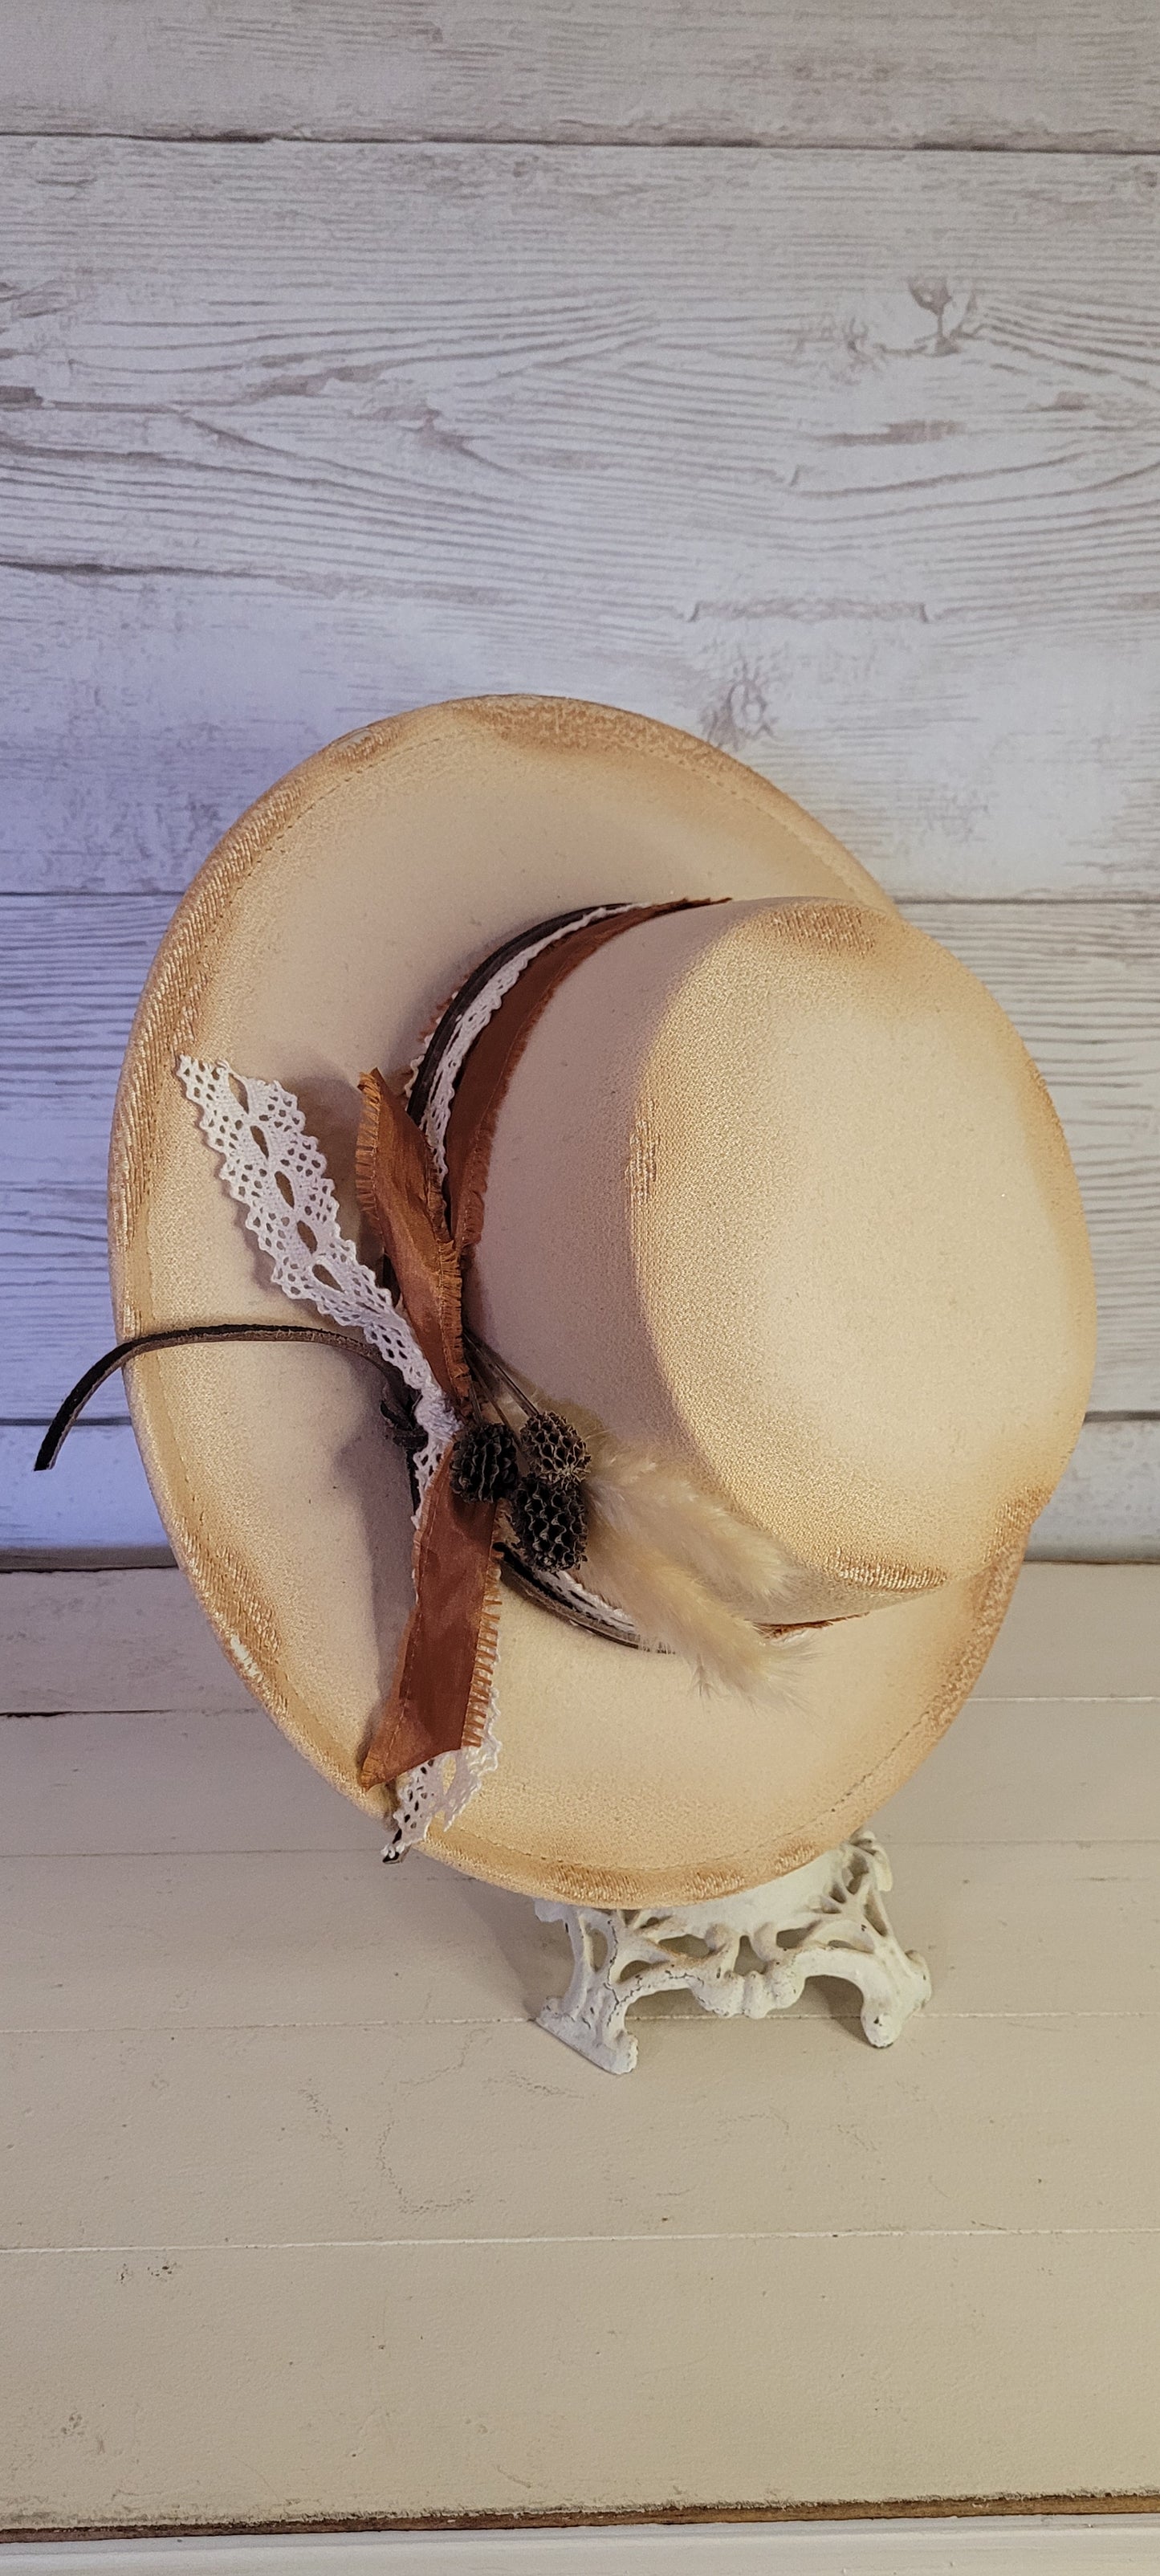 Lace ribbon, frayed lace ribbon, leather band, pampas, pine cones Felt hat Flat brim 100% polyester Ribbon drawstring for hat size adjustment Head Circumference: 24" Crown Height: 3.5" Brim Length: 13.5" Brim Width: 12.75" Branded & numbered inside crown Custom burned & engraved by Kayla